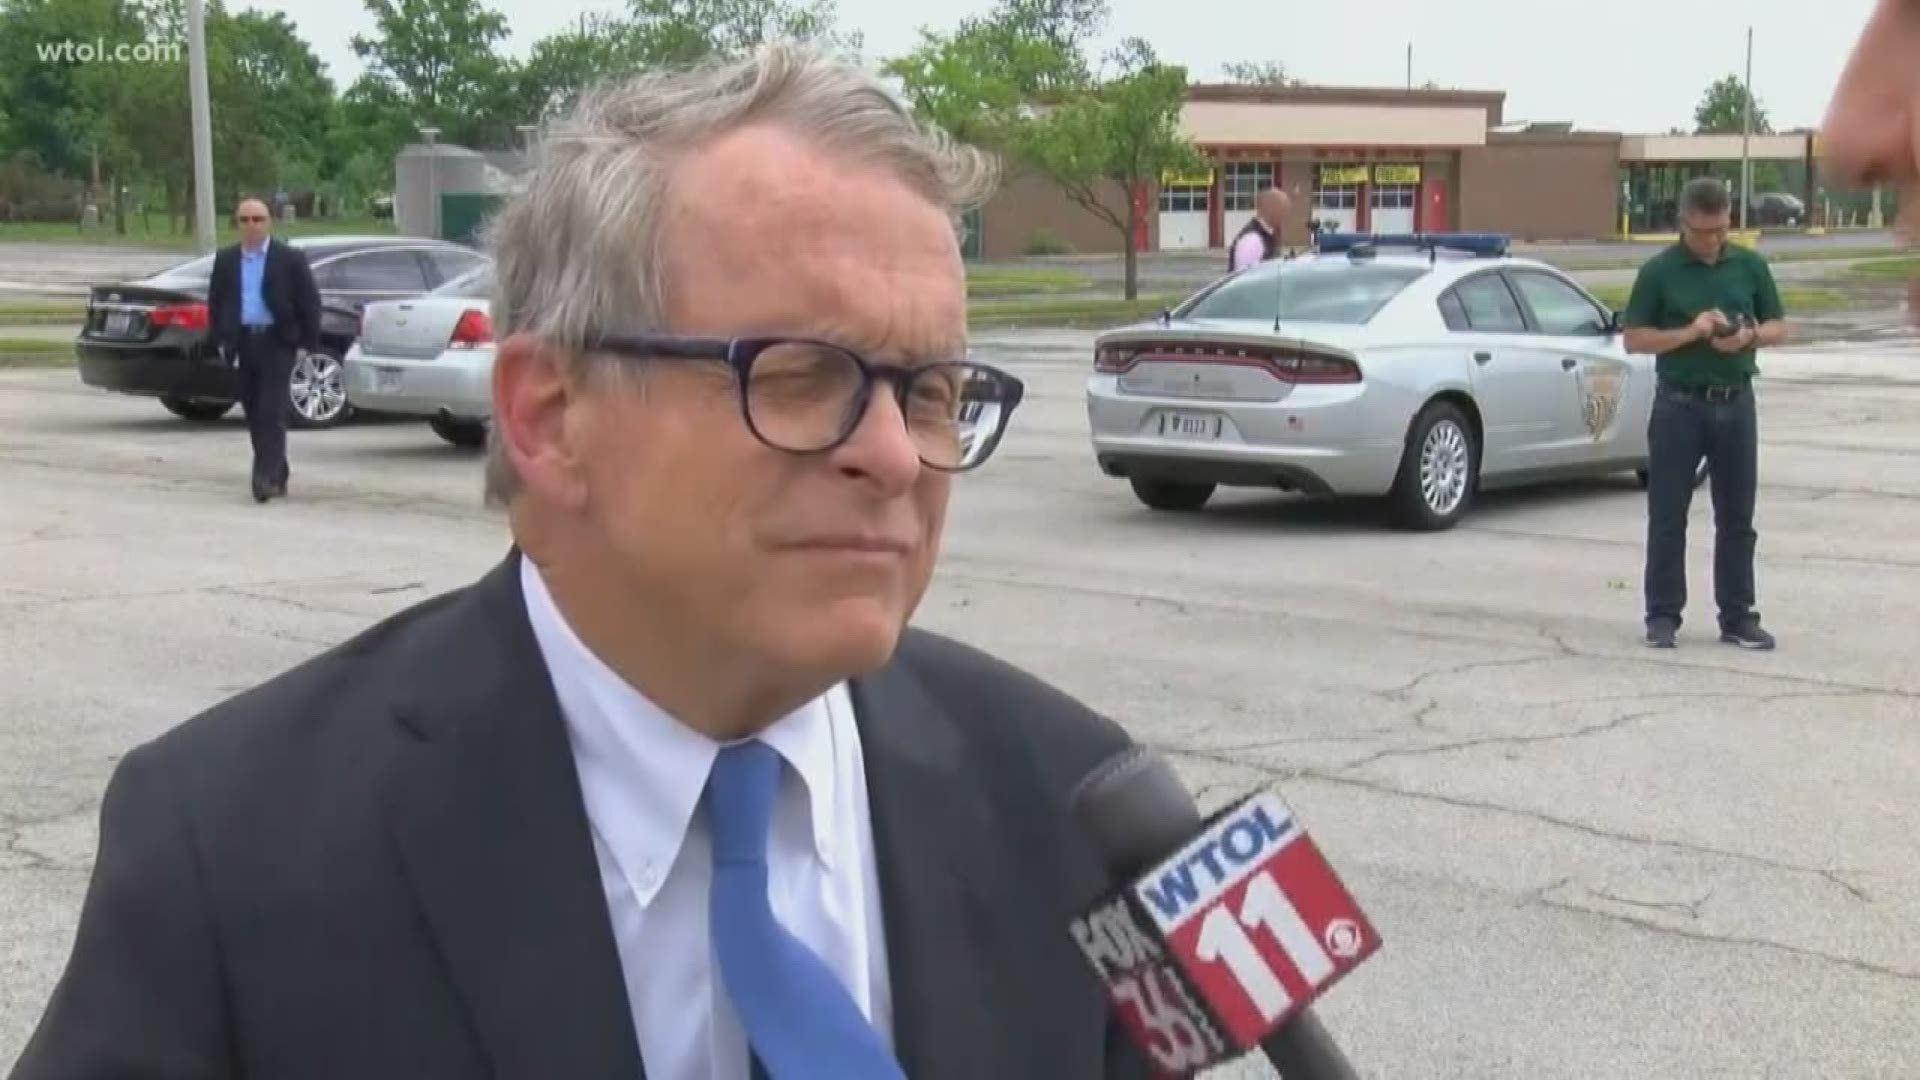 DeWine will travel to Dayton after spending time in Celina, where an 81-year-old man was killed in Monday's tornado